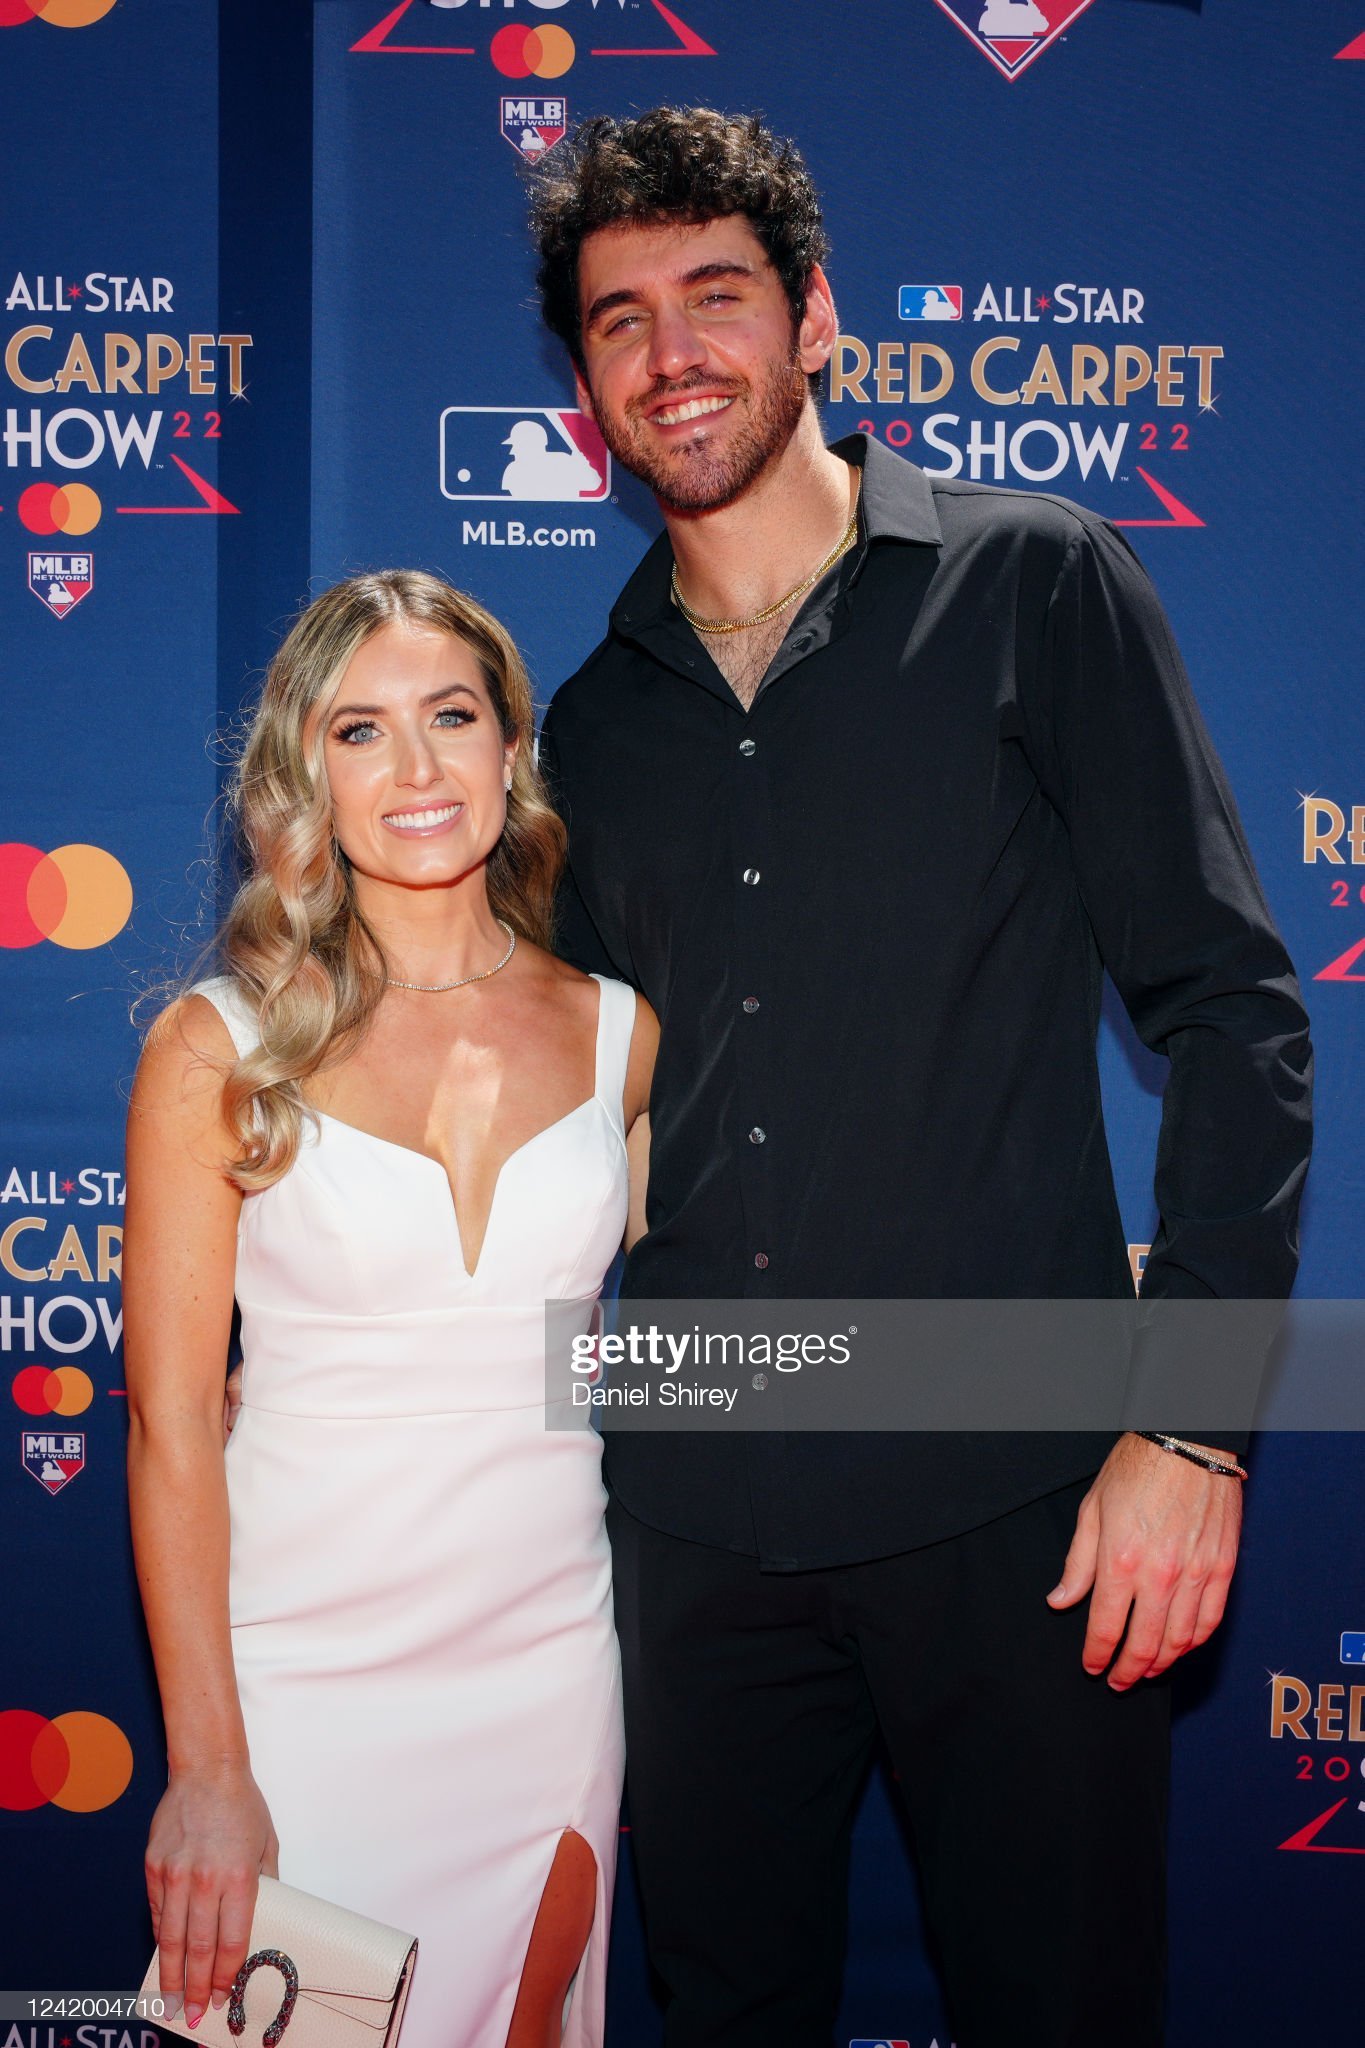 Biggles14 on X: Jordan Romano and his fiancee. #Allstargame #BlueJays  #Gettyimages  / X